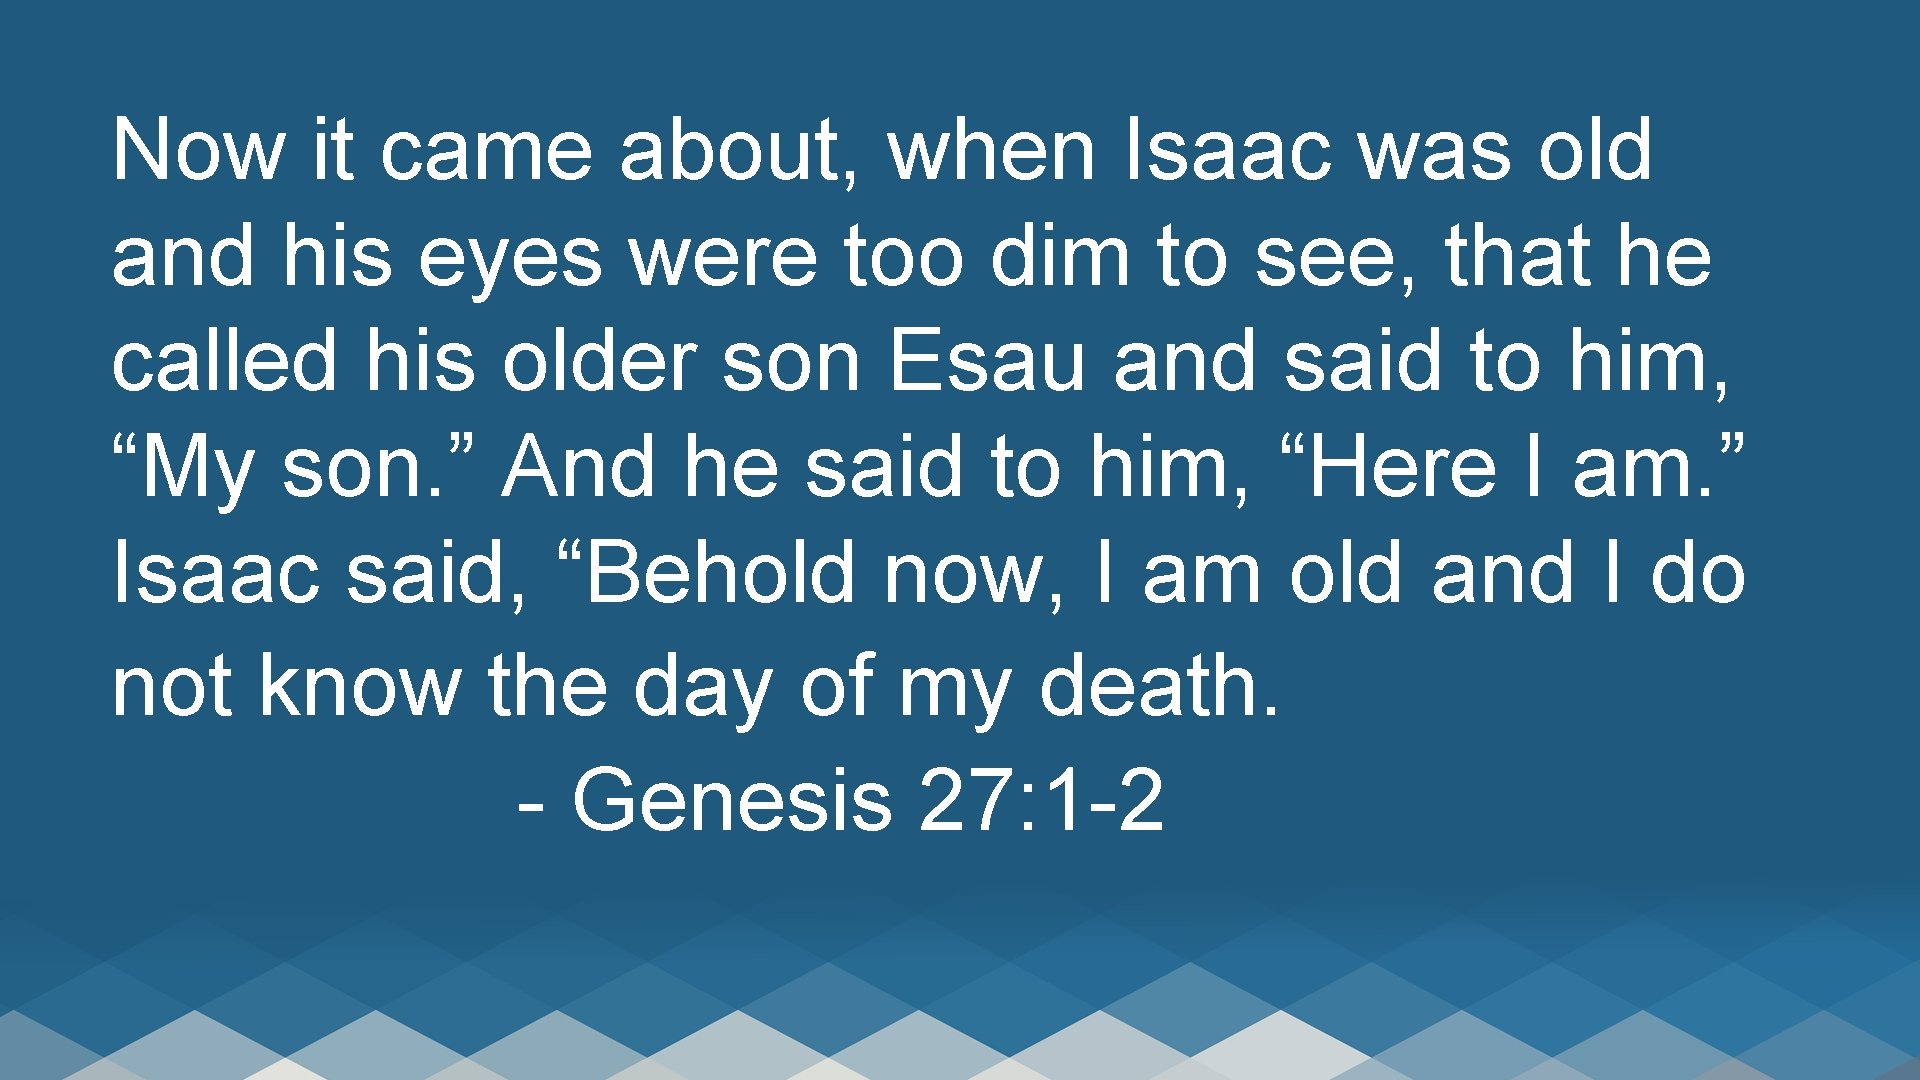 Now it came about, when Isaac was old and his eyes were too dim